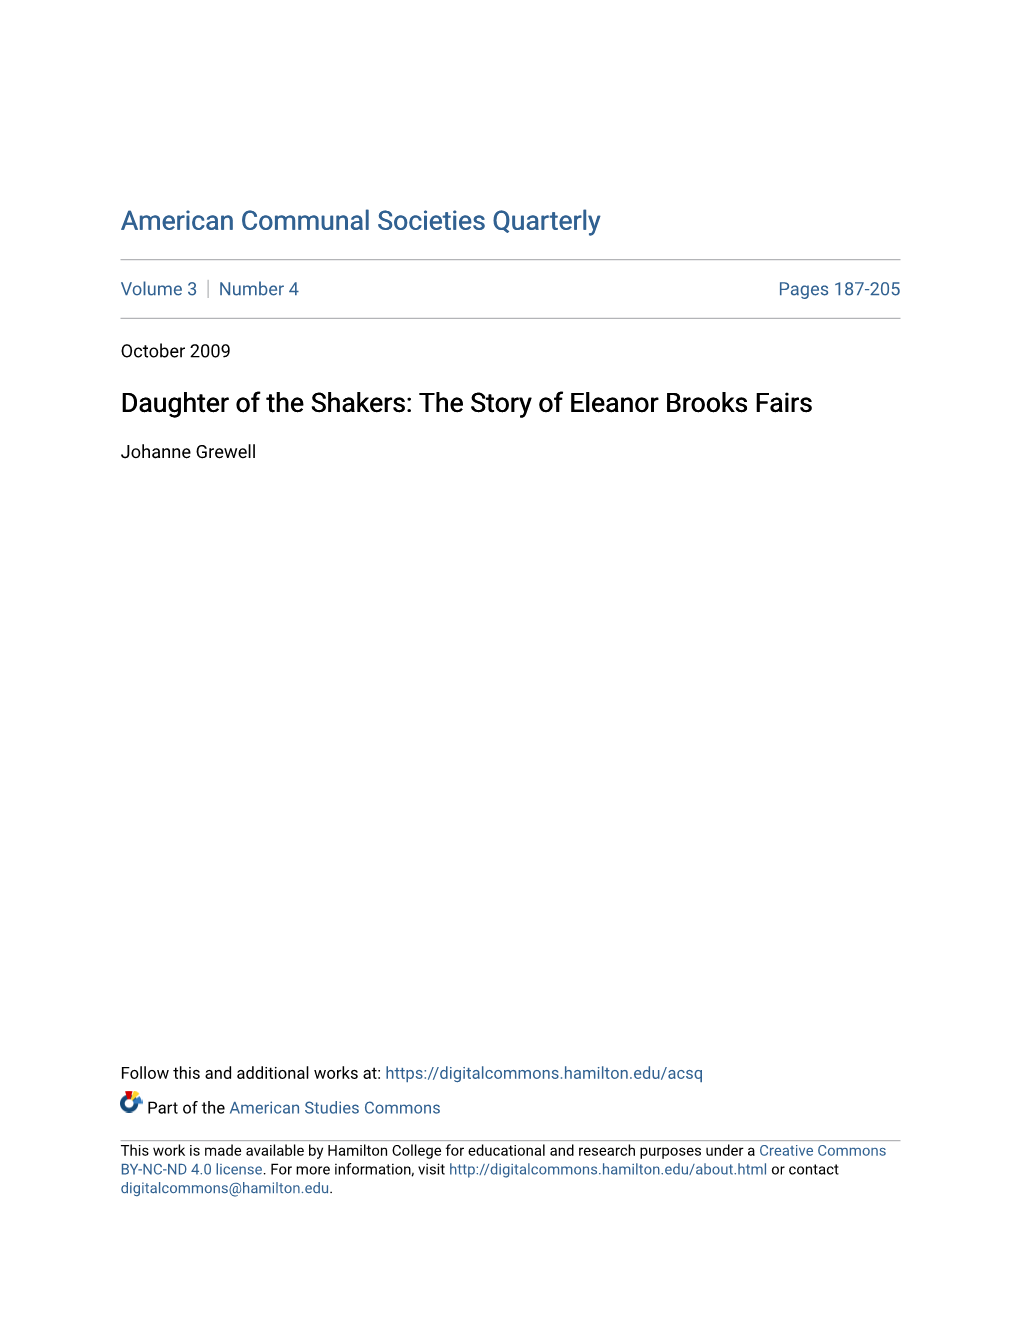 Daughter of the Shakers: the Story of Eleanor Brooks Fairs